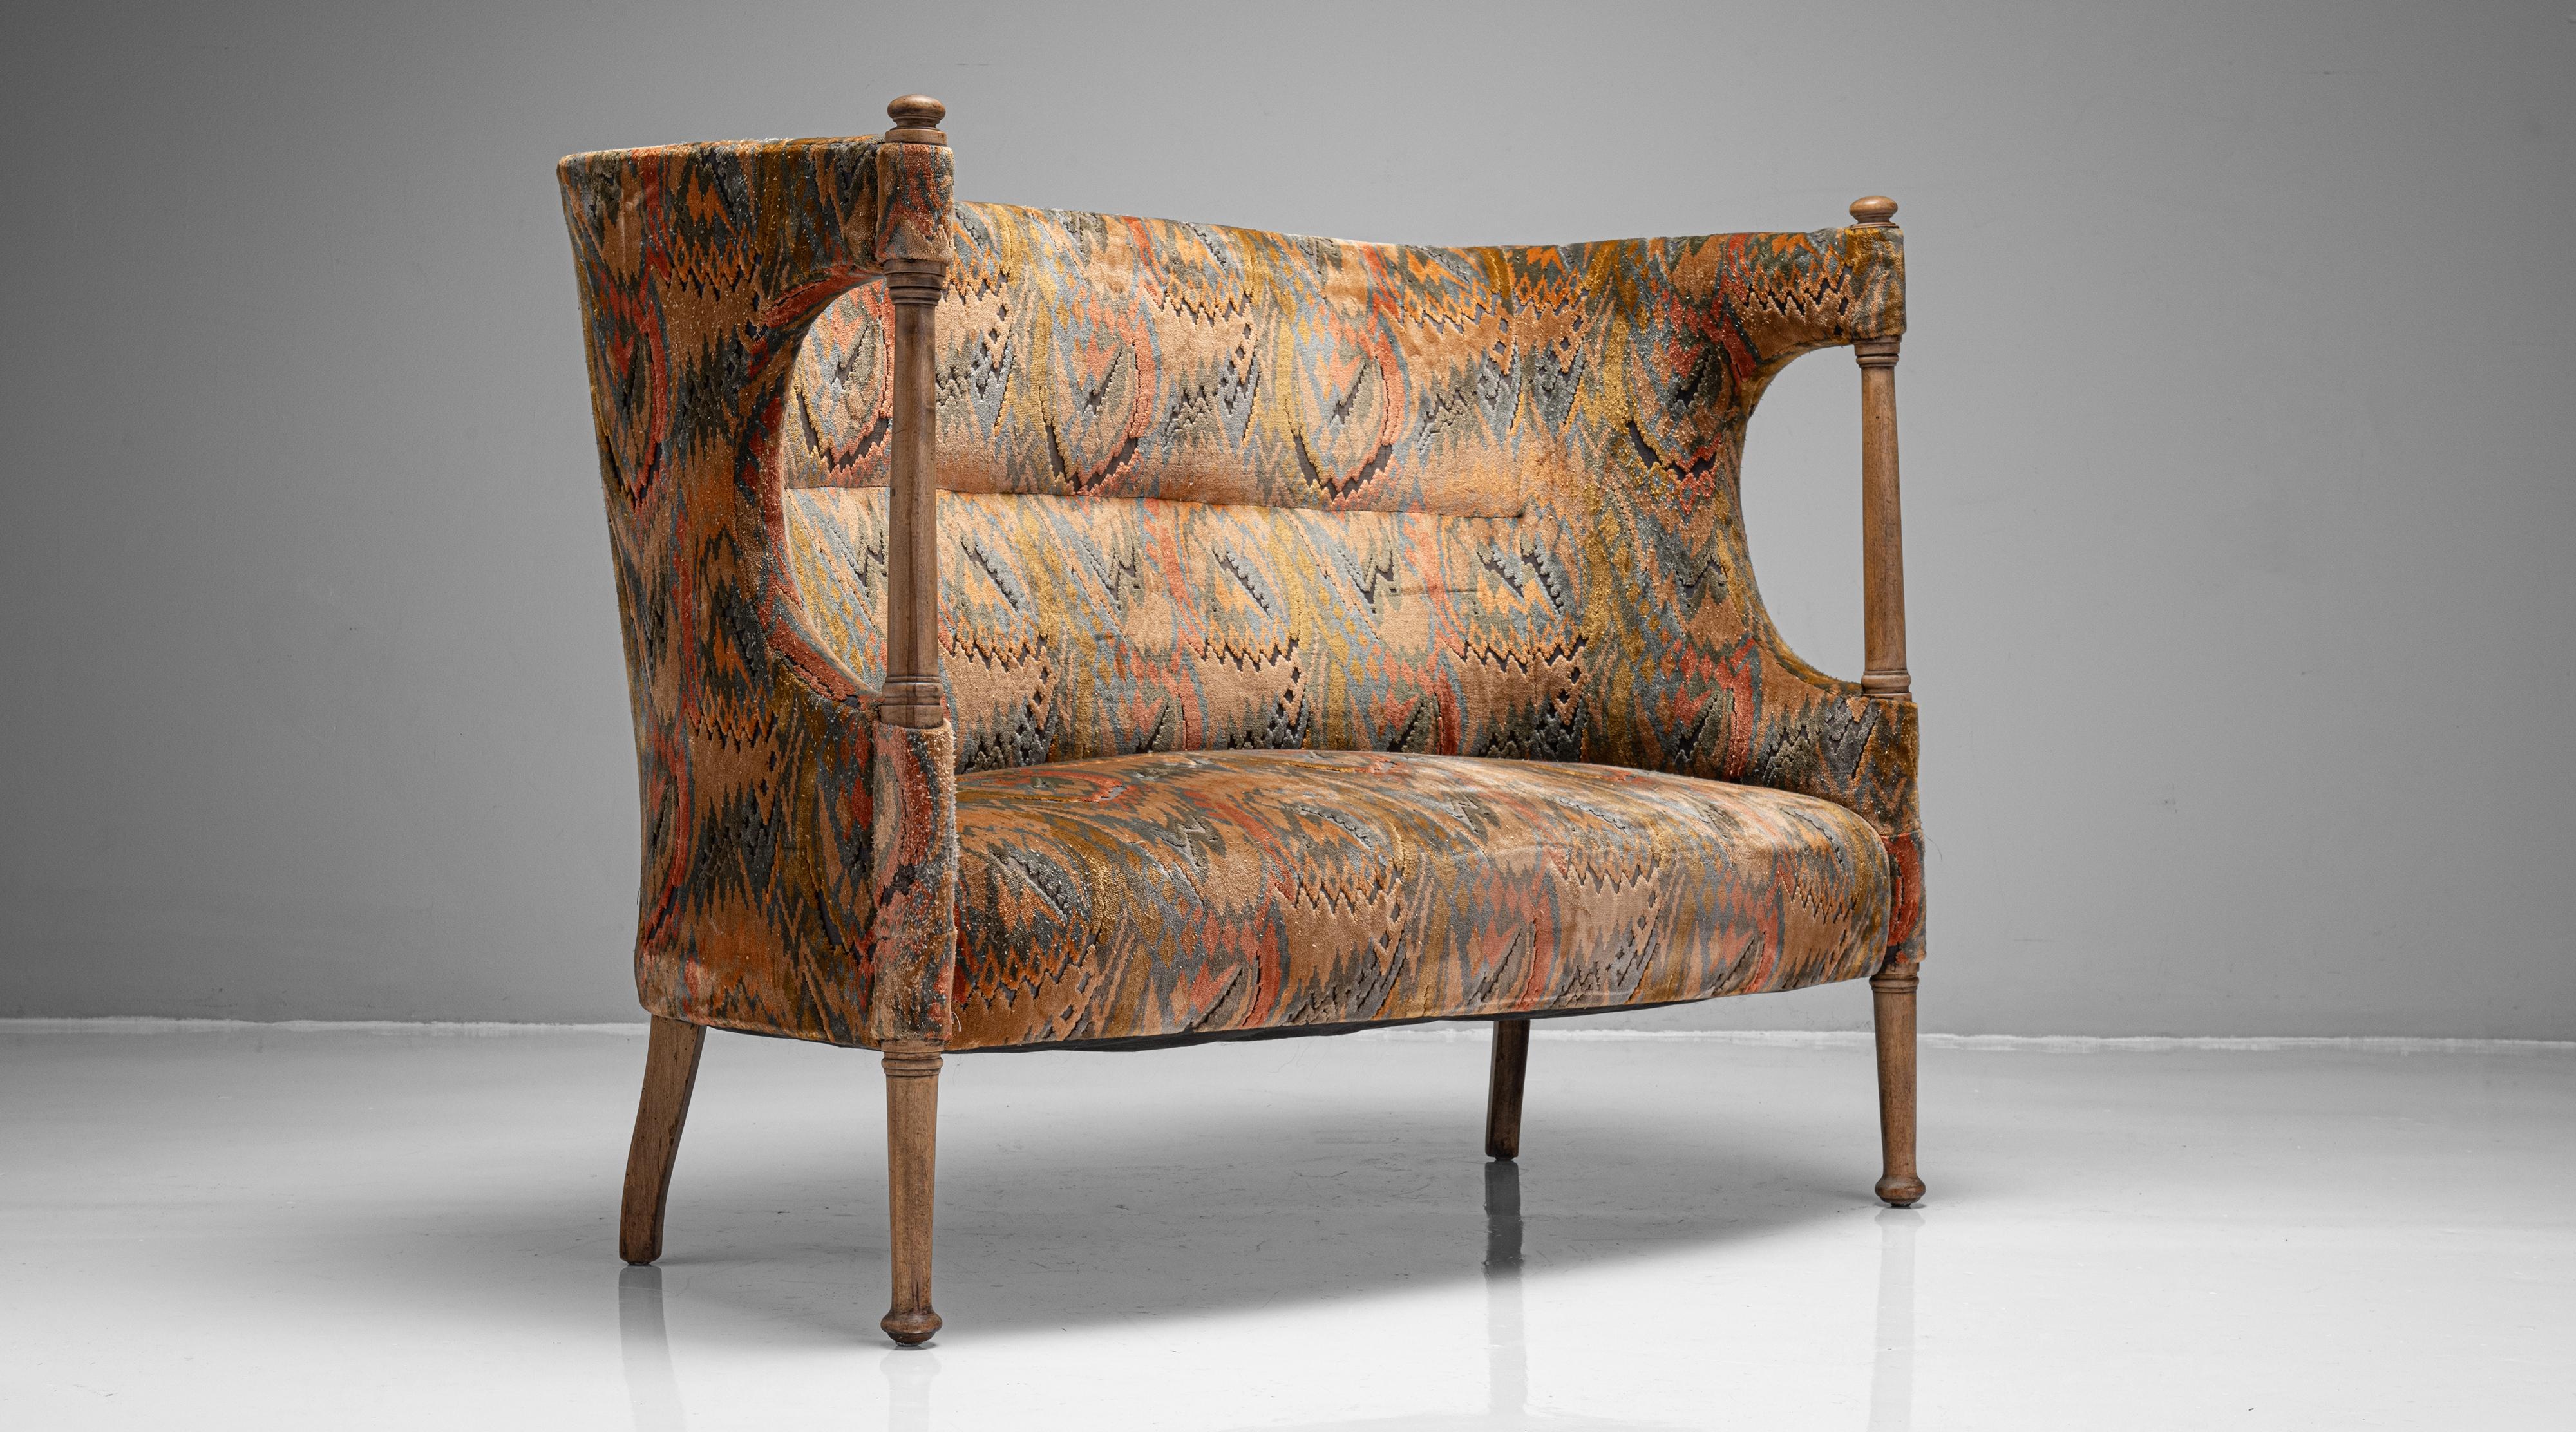 Liberty of London Sofa
England, circa 1890

Beautifully designed sofa by William Birch, traditionally reupholstered in the 1970’s.

Measures: 54” W x 27.5” D x 42.25” H x 119” seat.

  

$ 7,200.